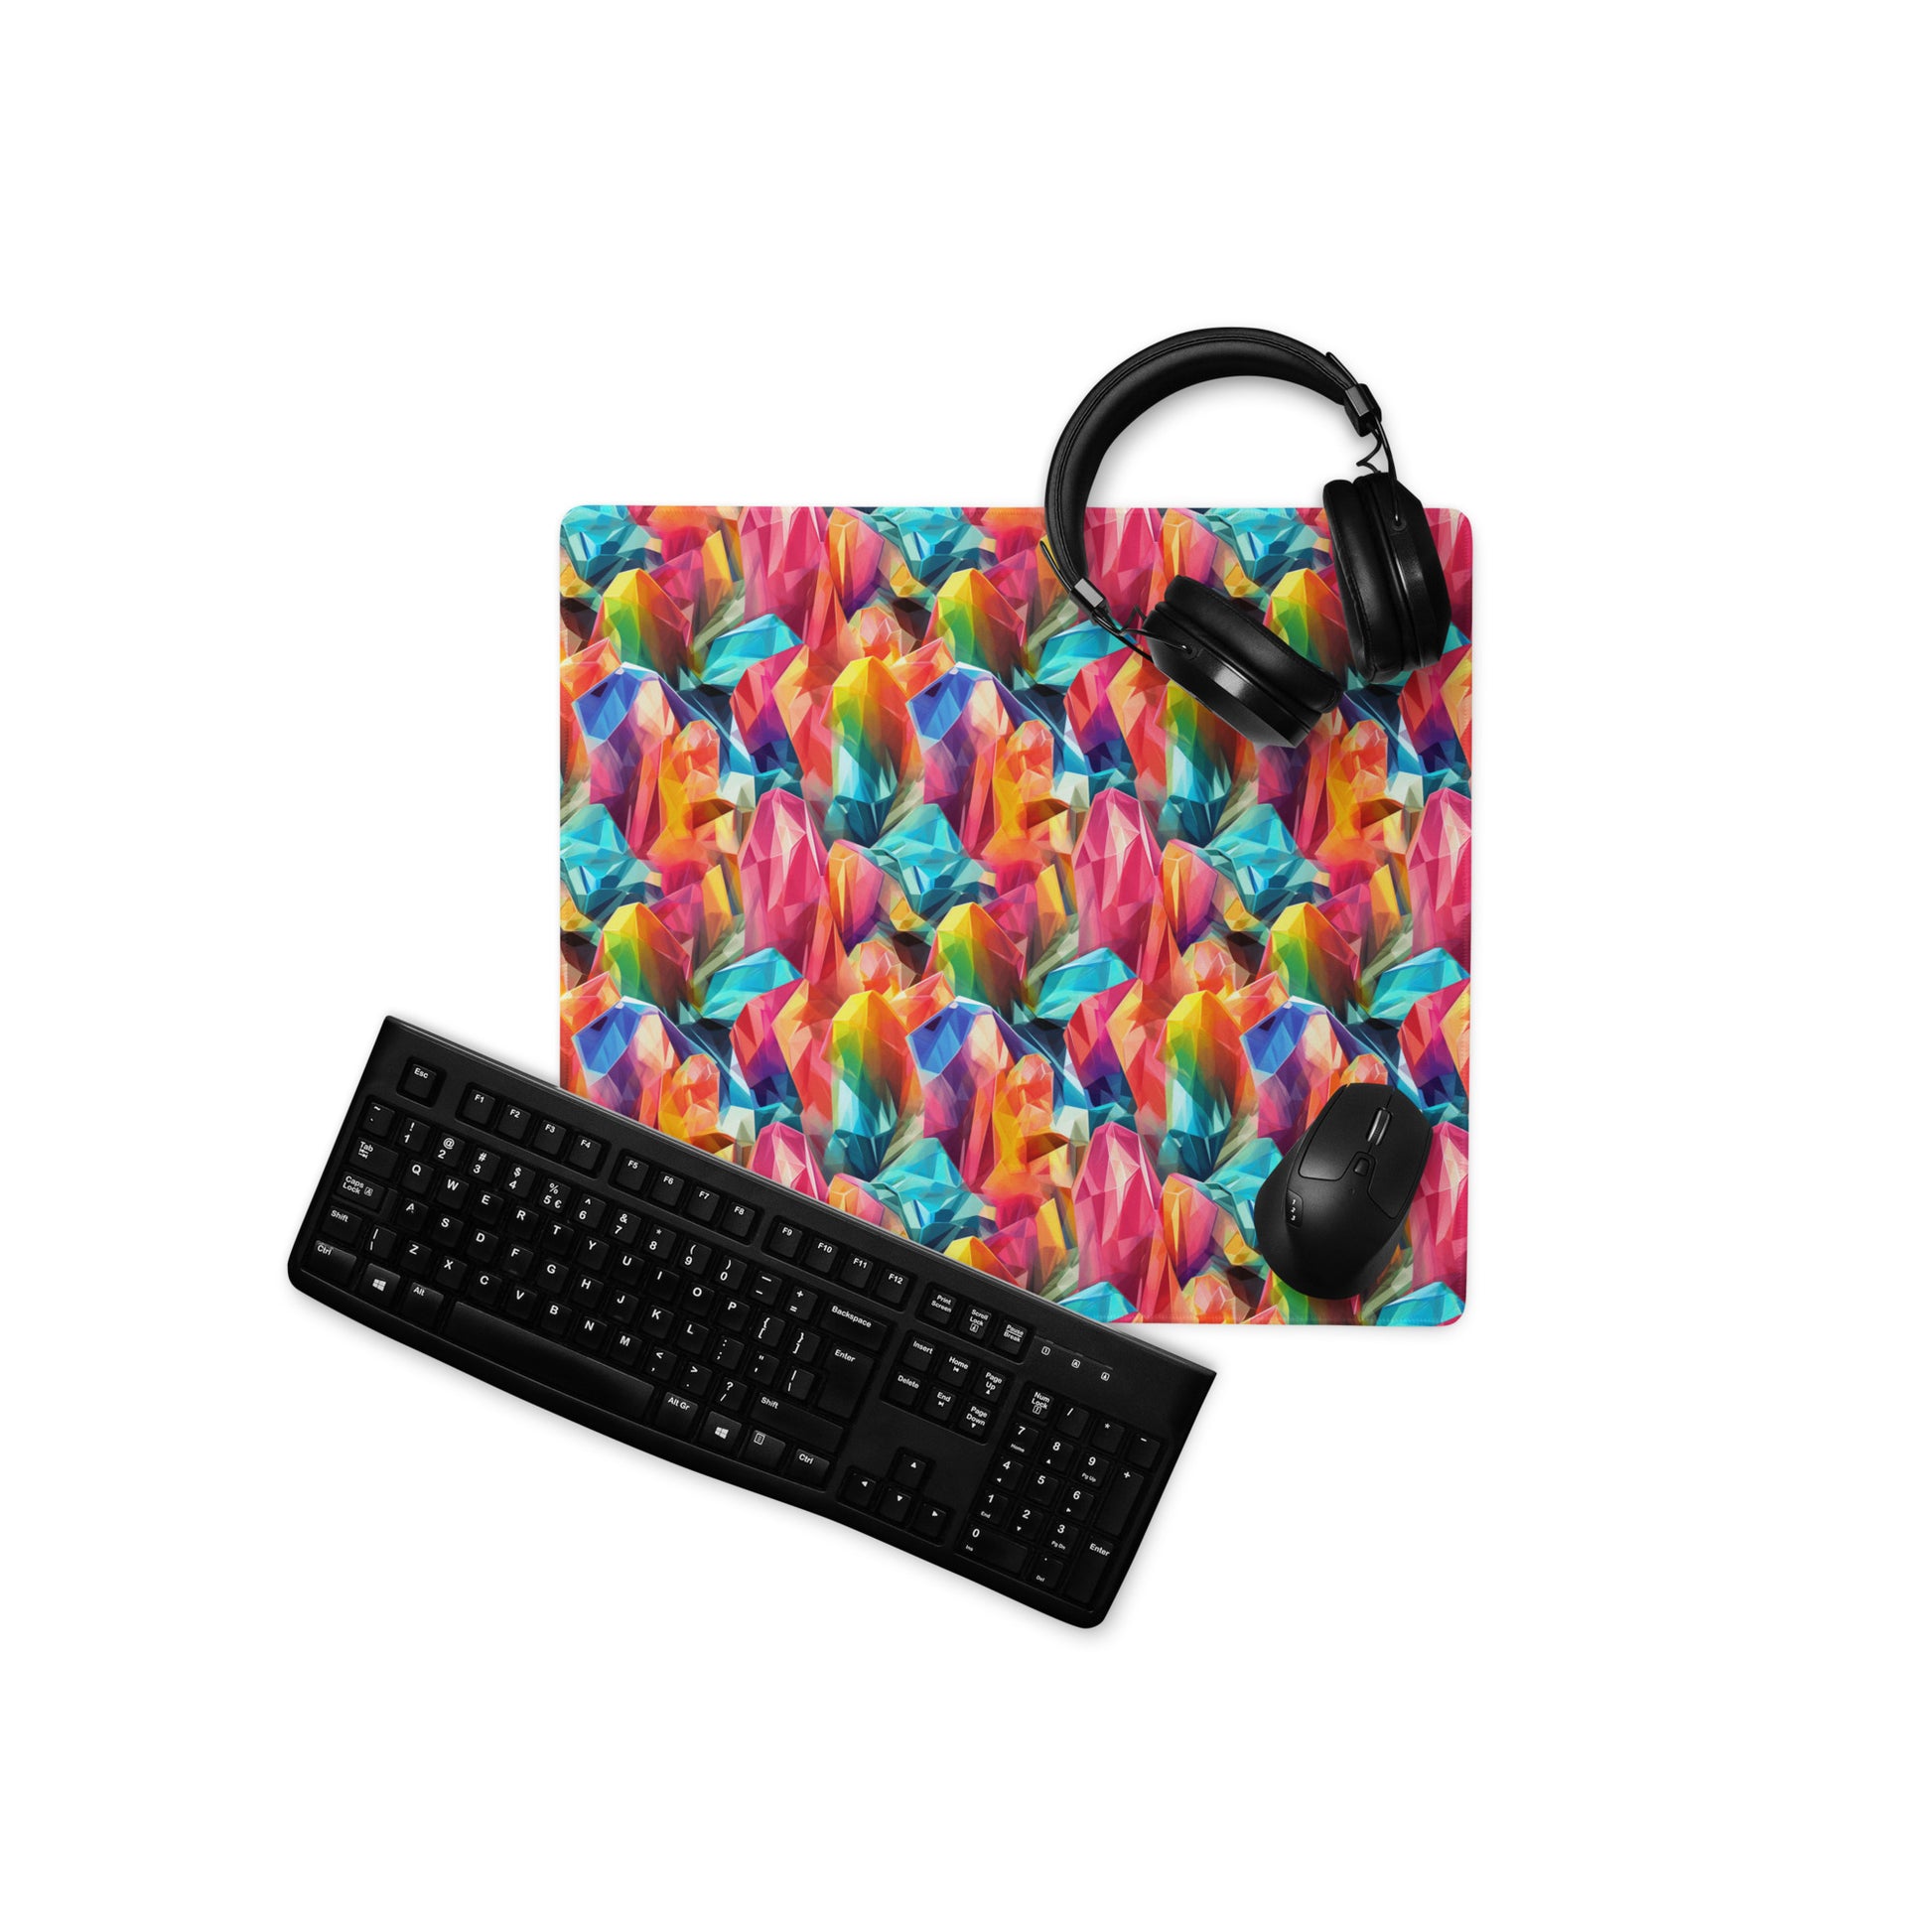 An 18" x 16" gaming desk pad with rainbow crystals. A keyboard, mouse, and headphones sit on it.